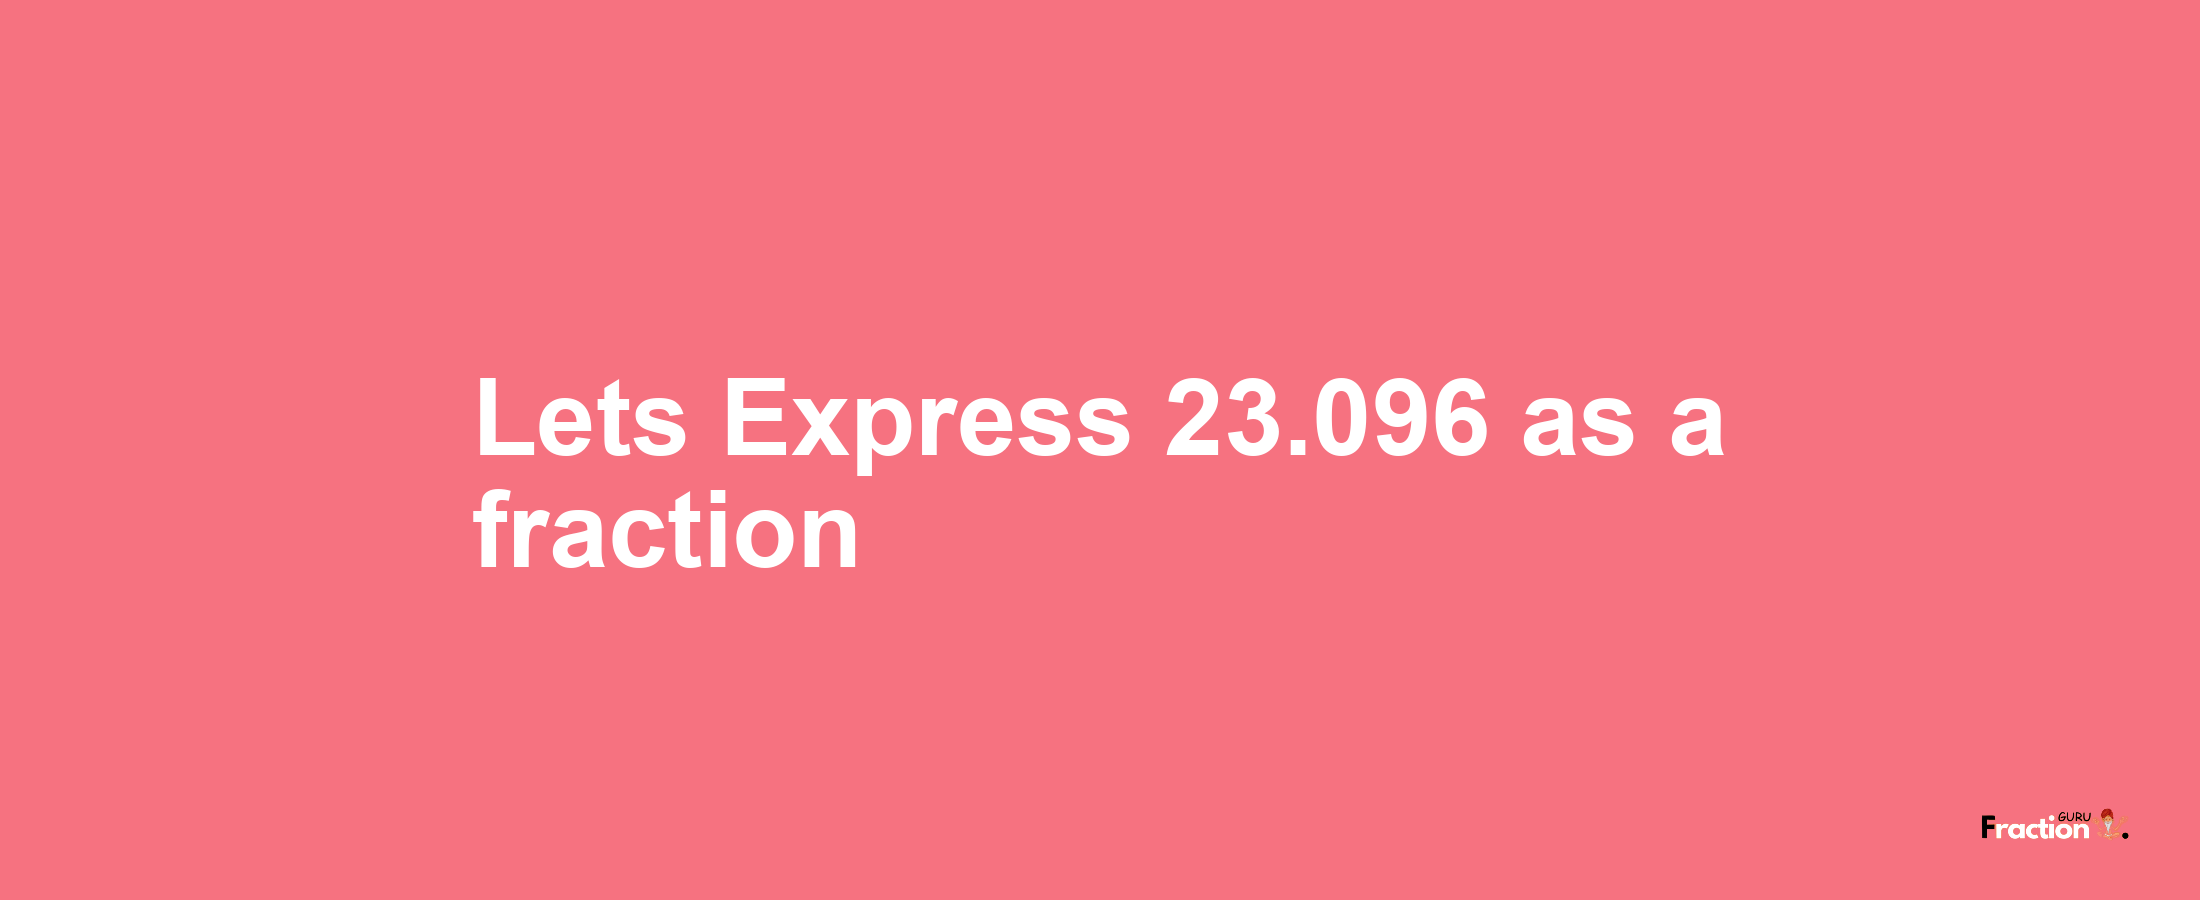 Lets Express 23.096 as afraction